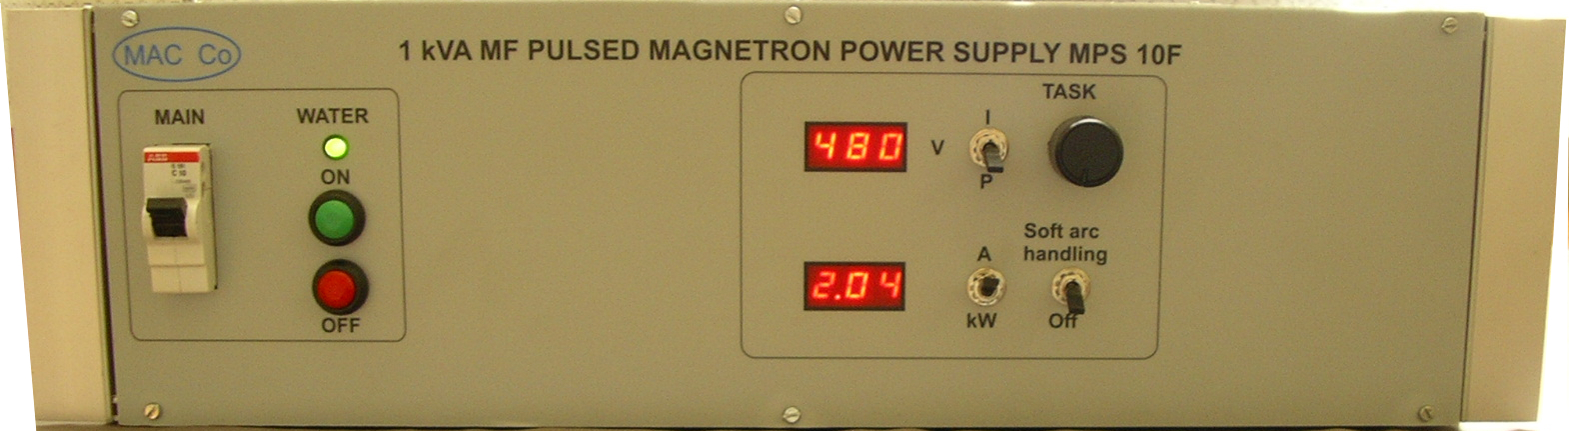 Magnetron Power Supply